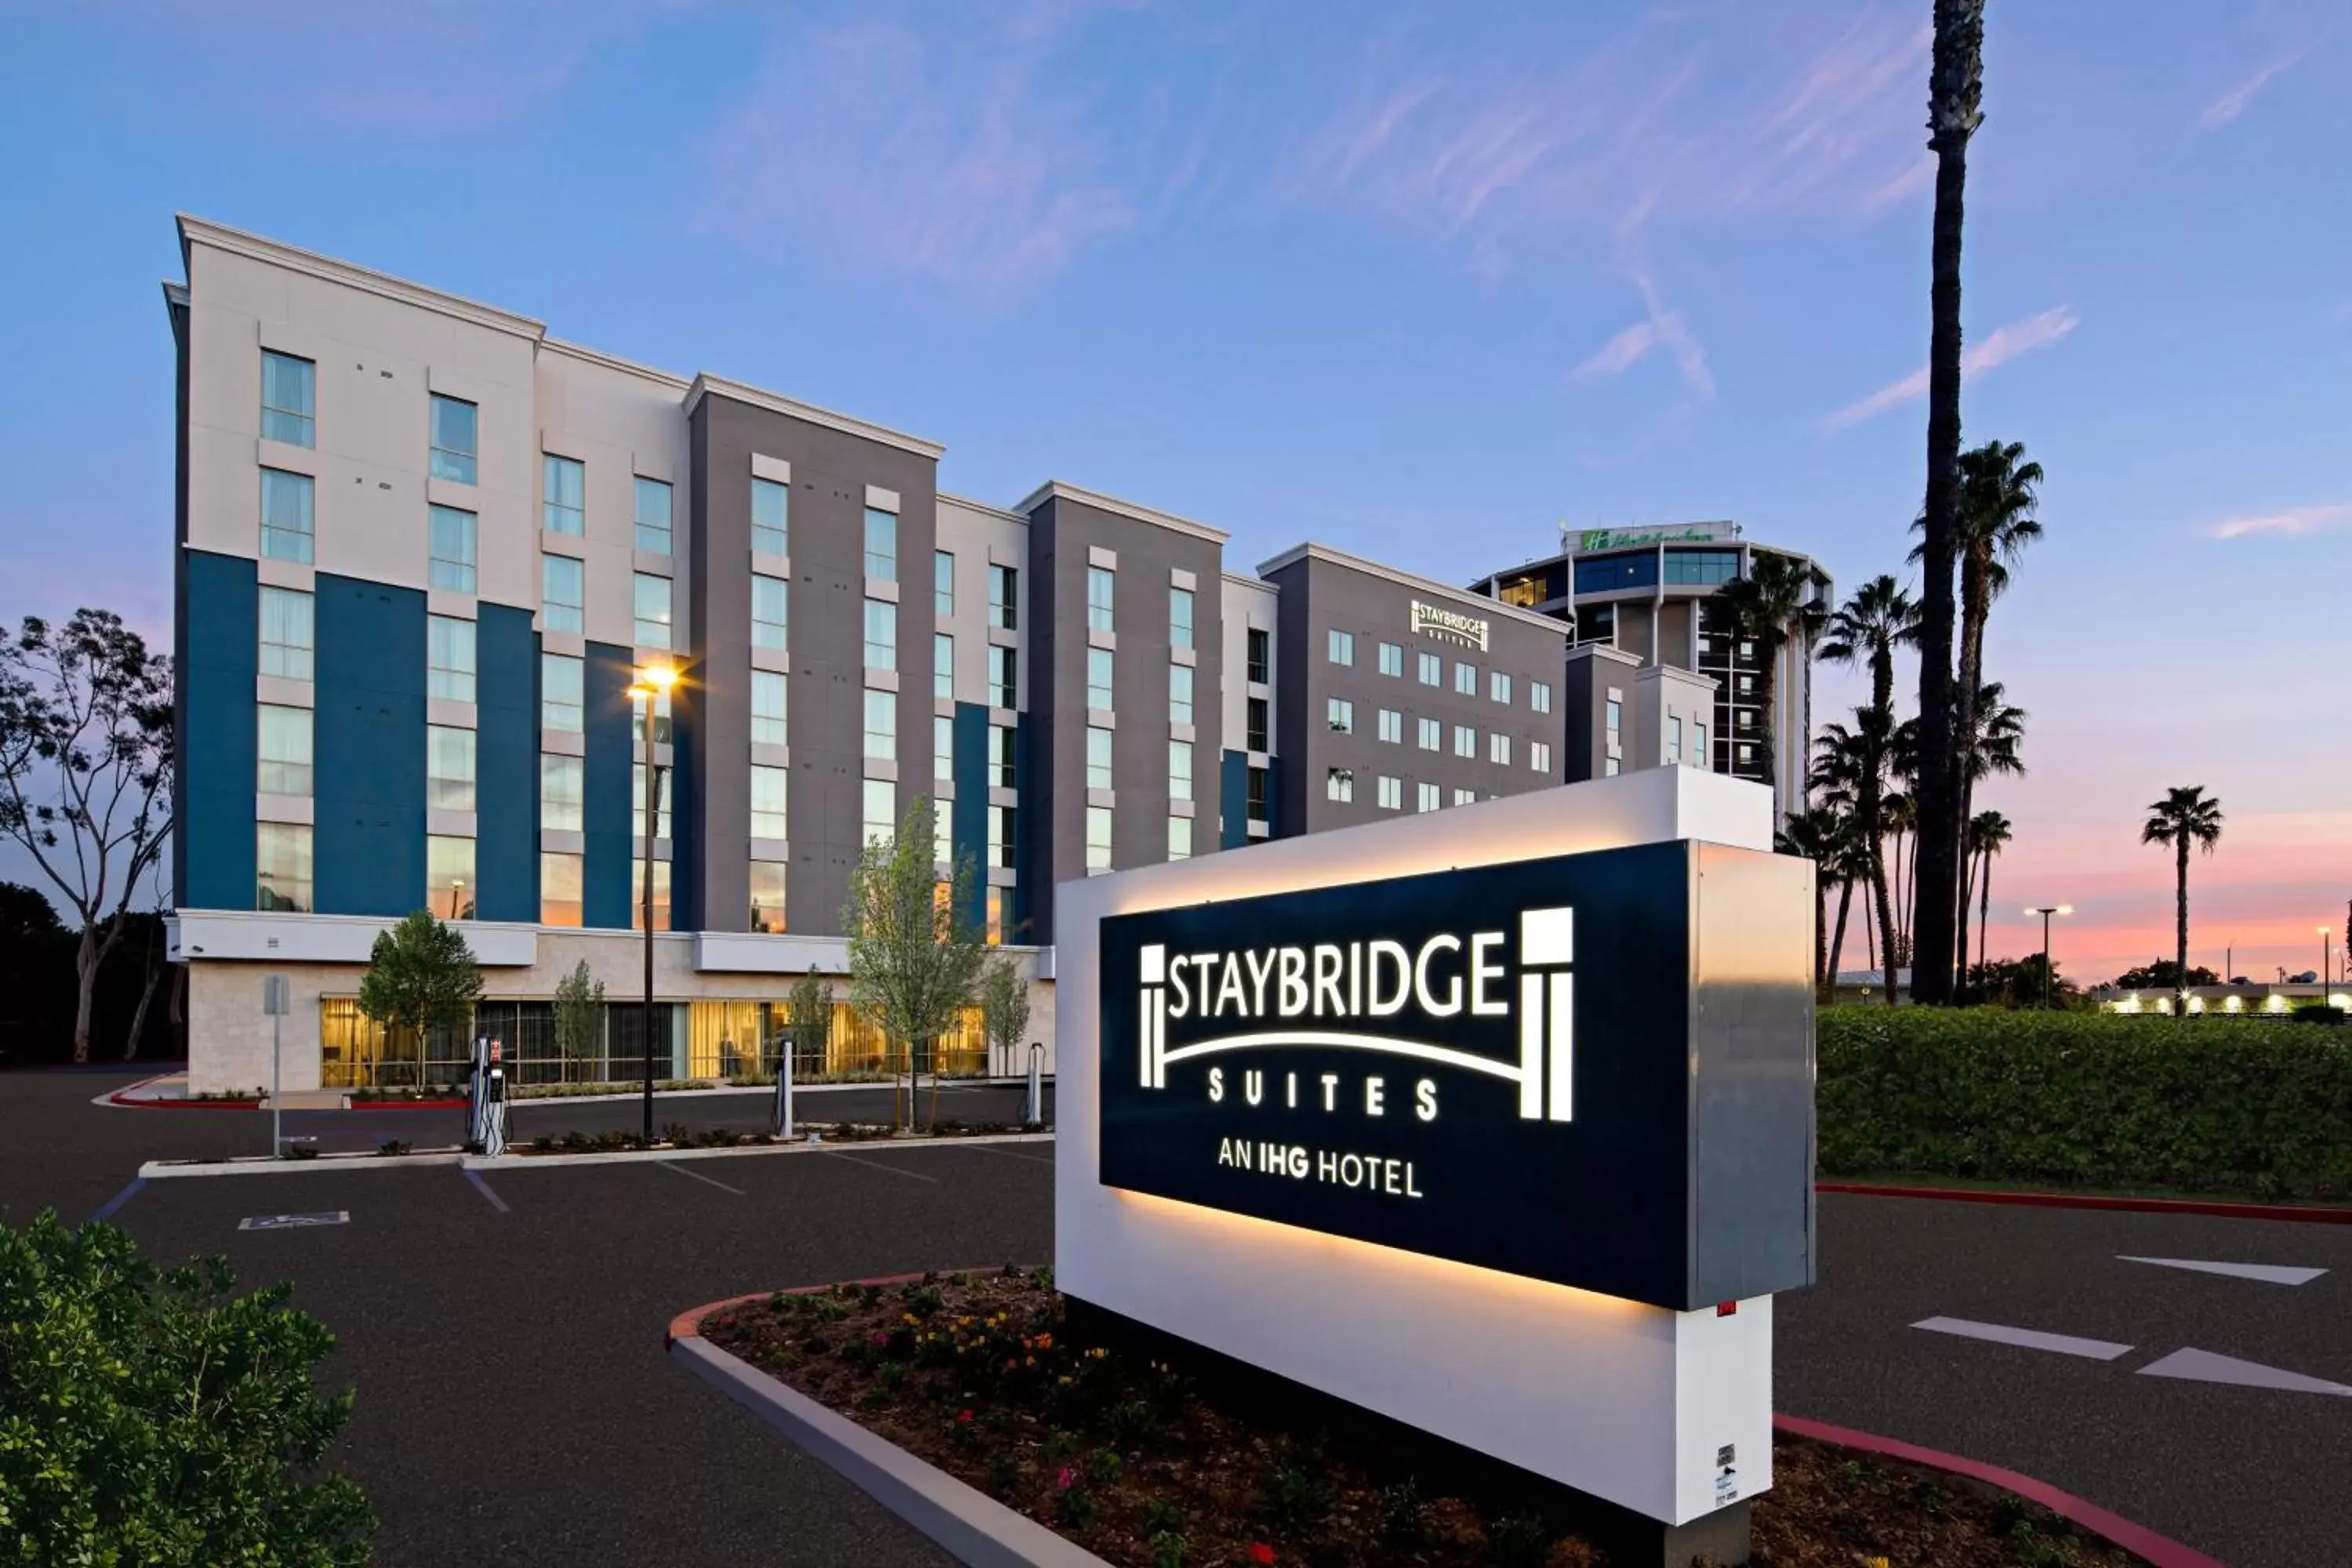 Property building in Staybridge Suites - Long Beach Airport, an IHG Hotel